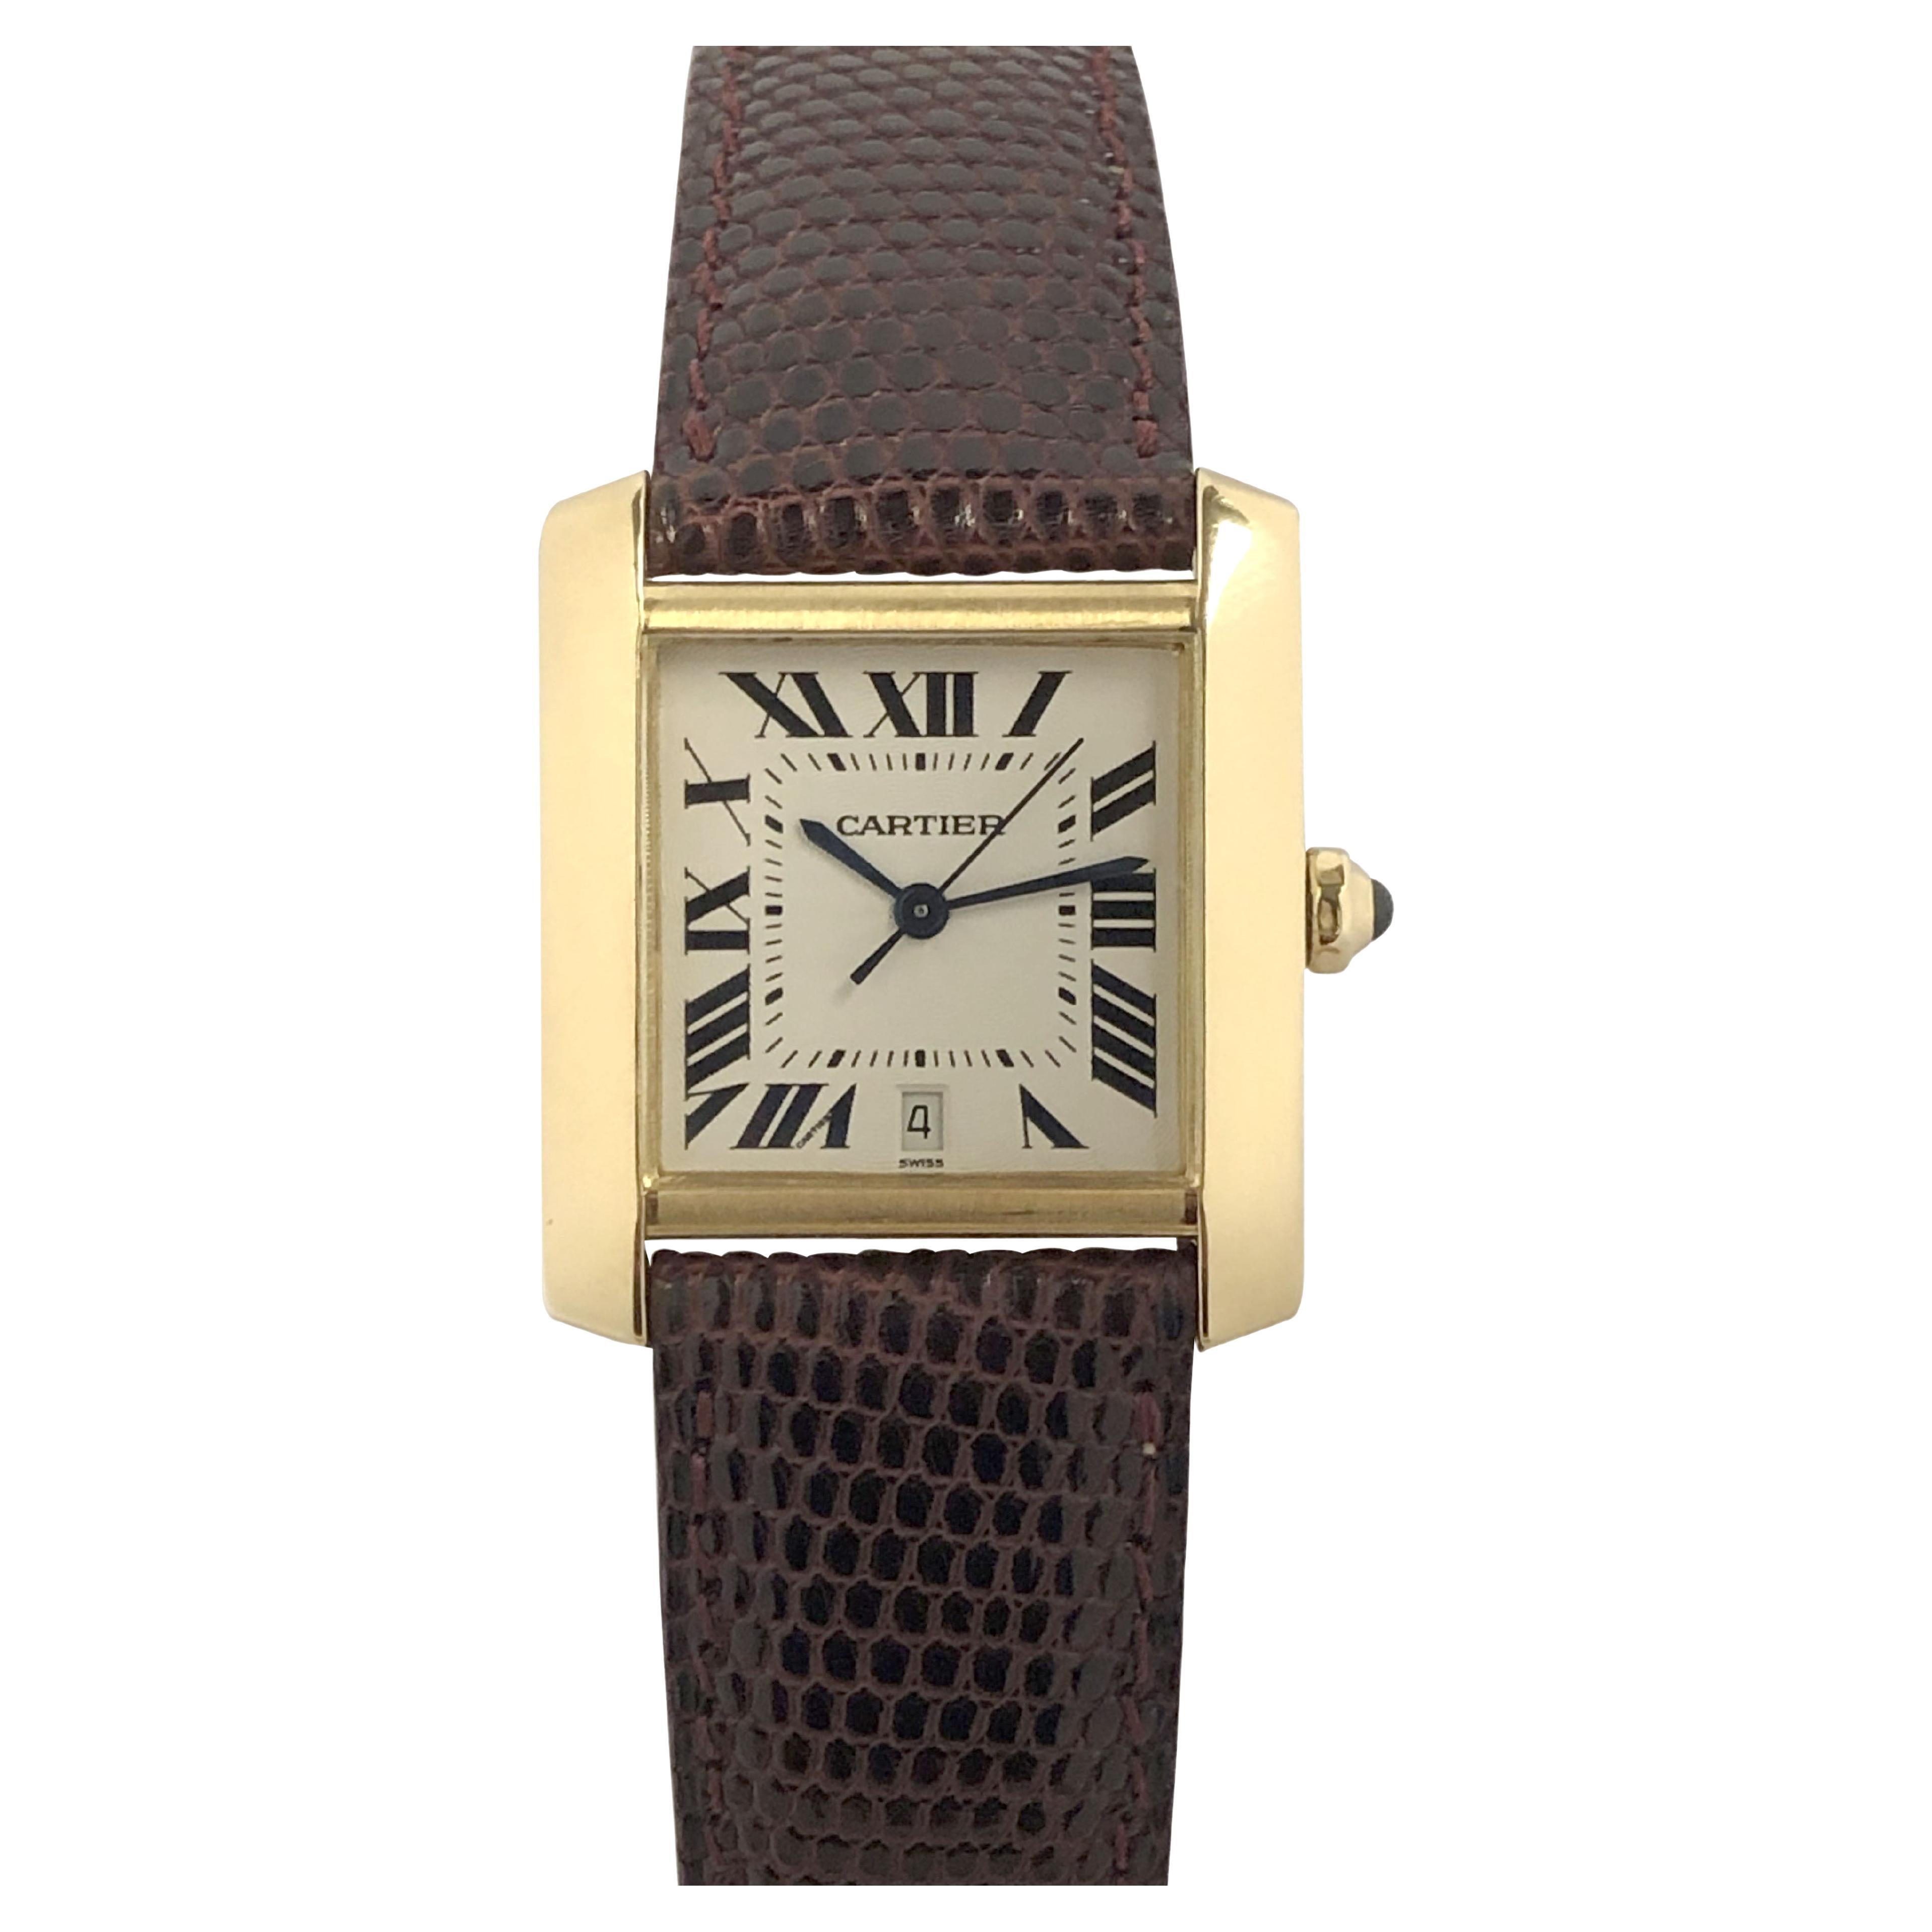 Cartier Tank Francaise Ref 1840 Large Yellow Gold Automatic Wrist Watch